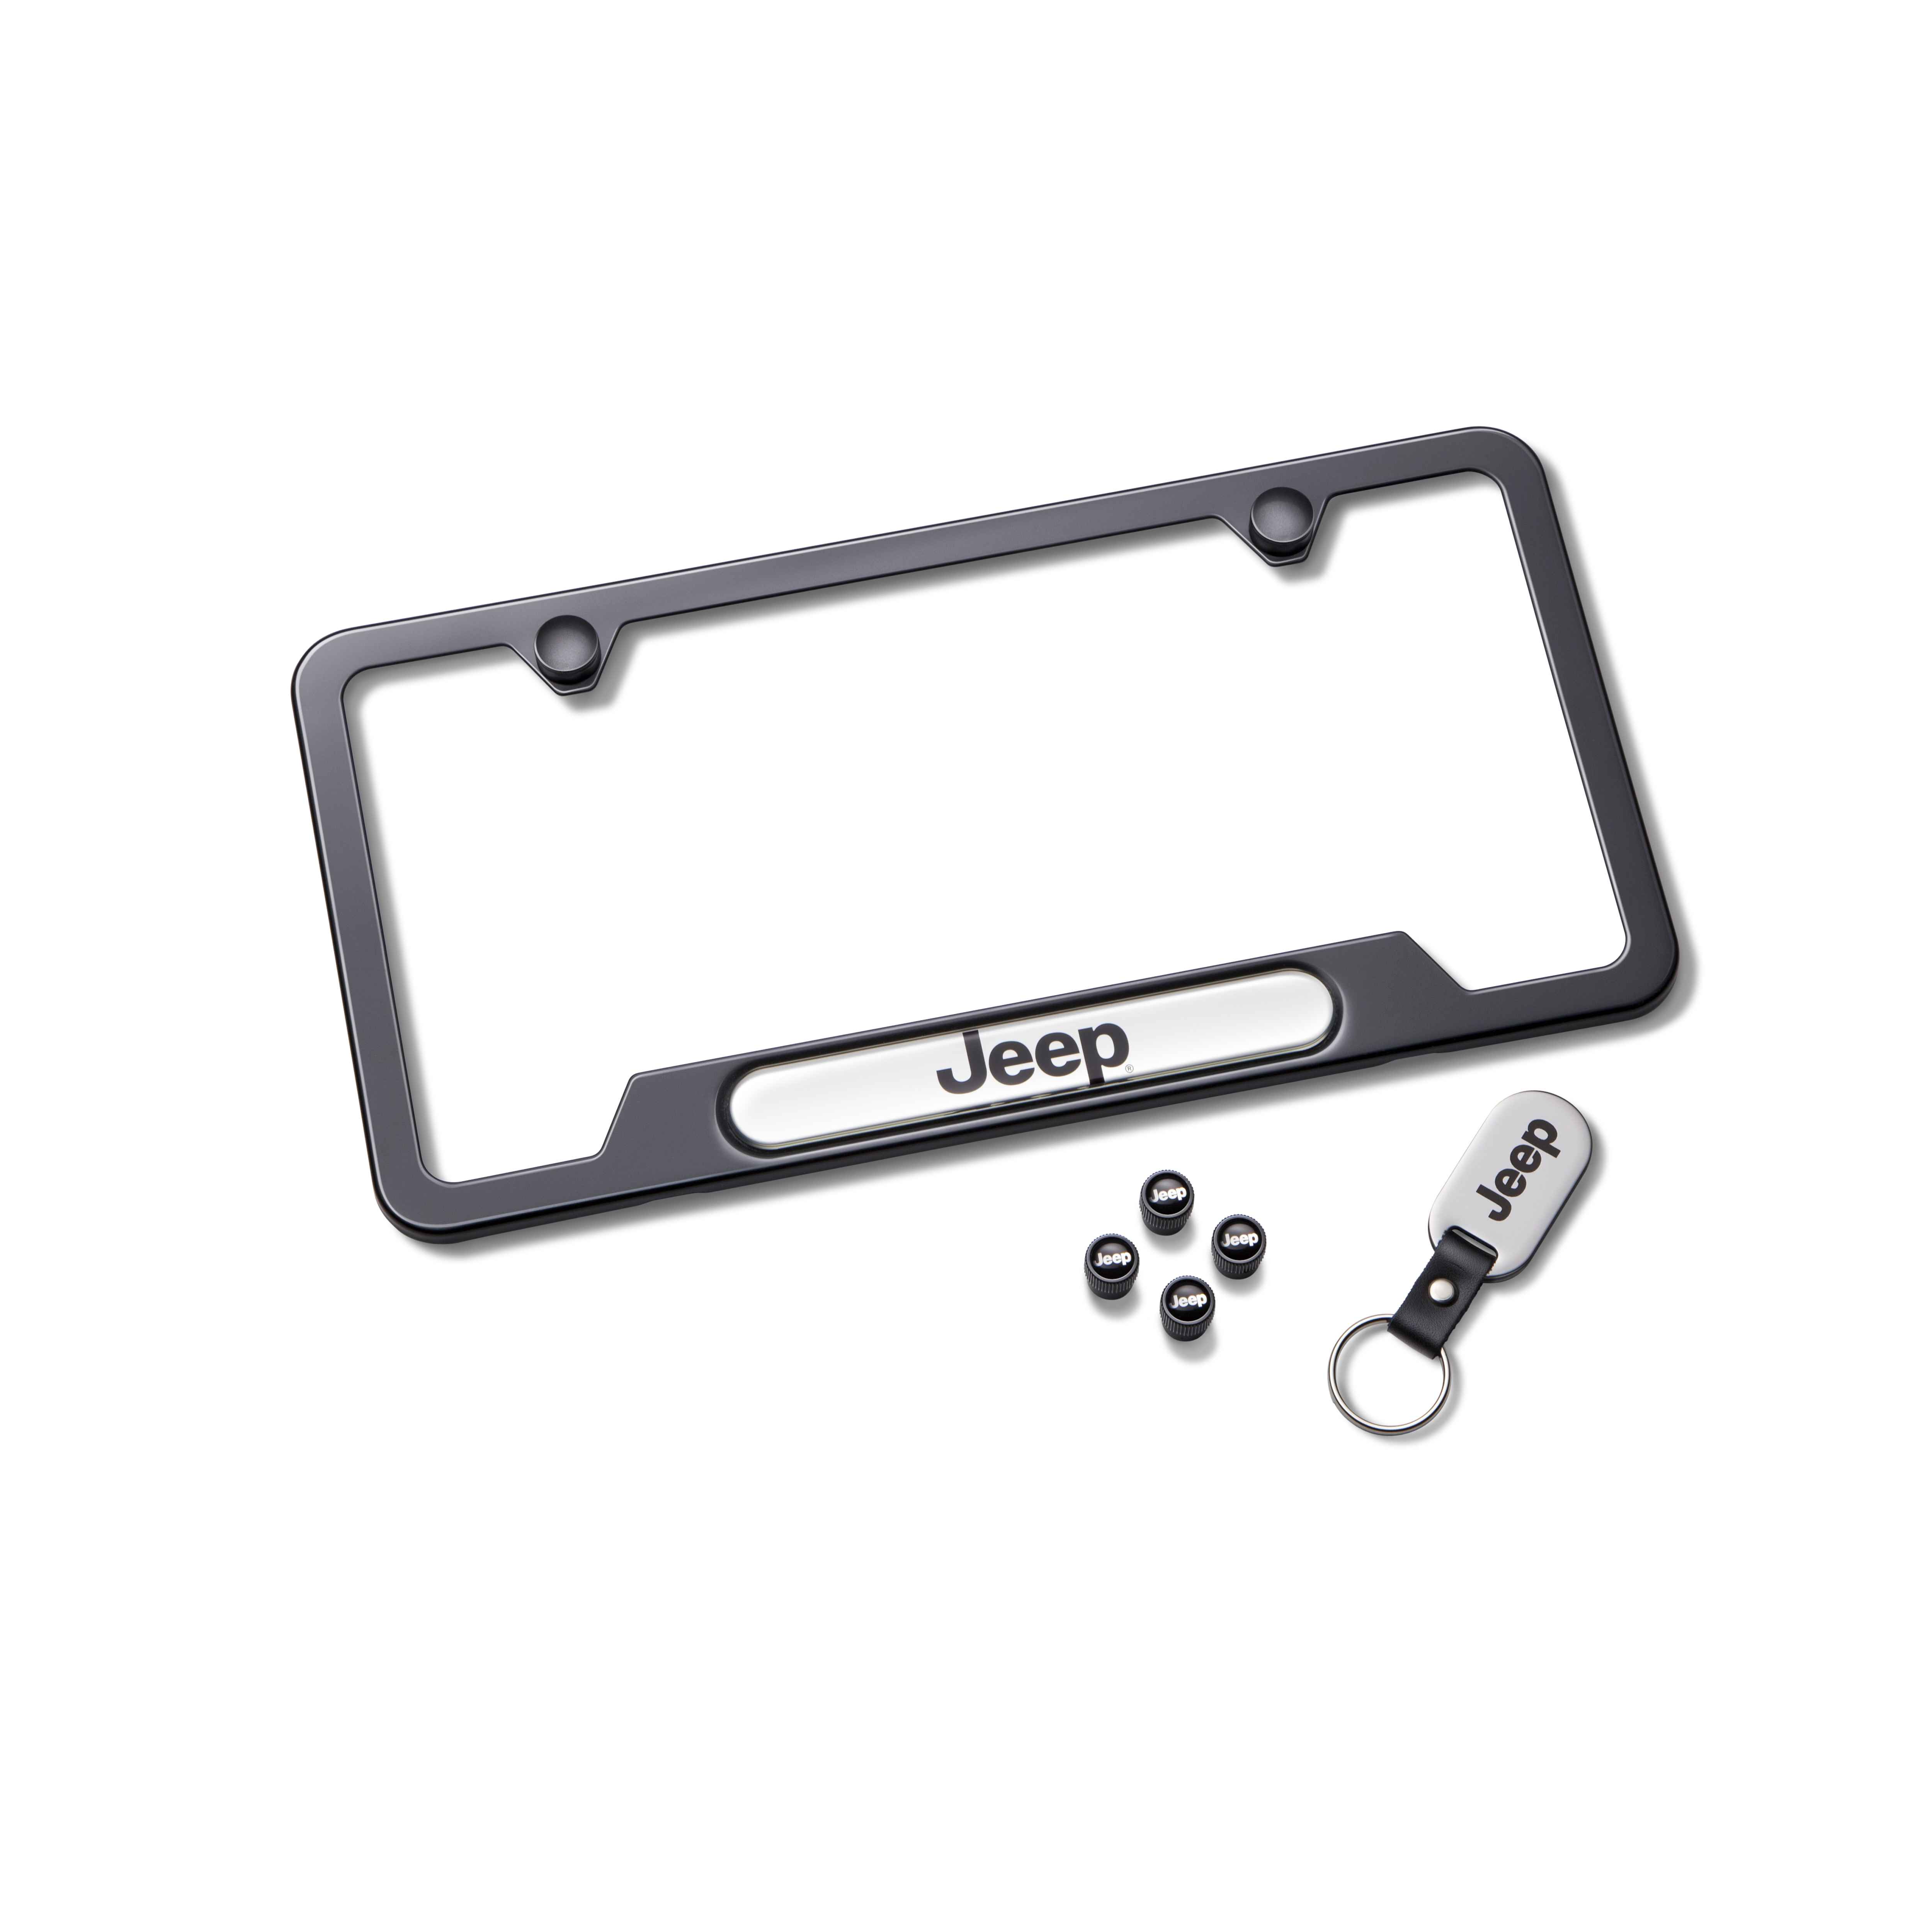 2020 Jeep Compass License Plate Frame Gift Set 82215853